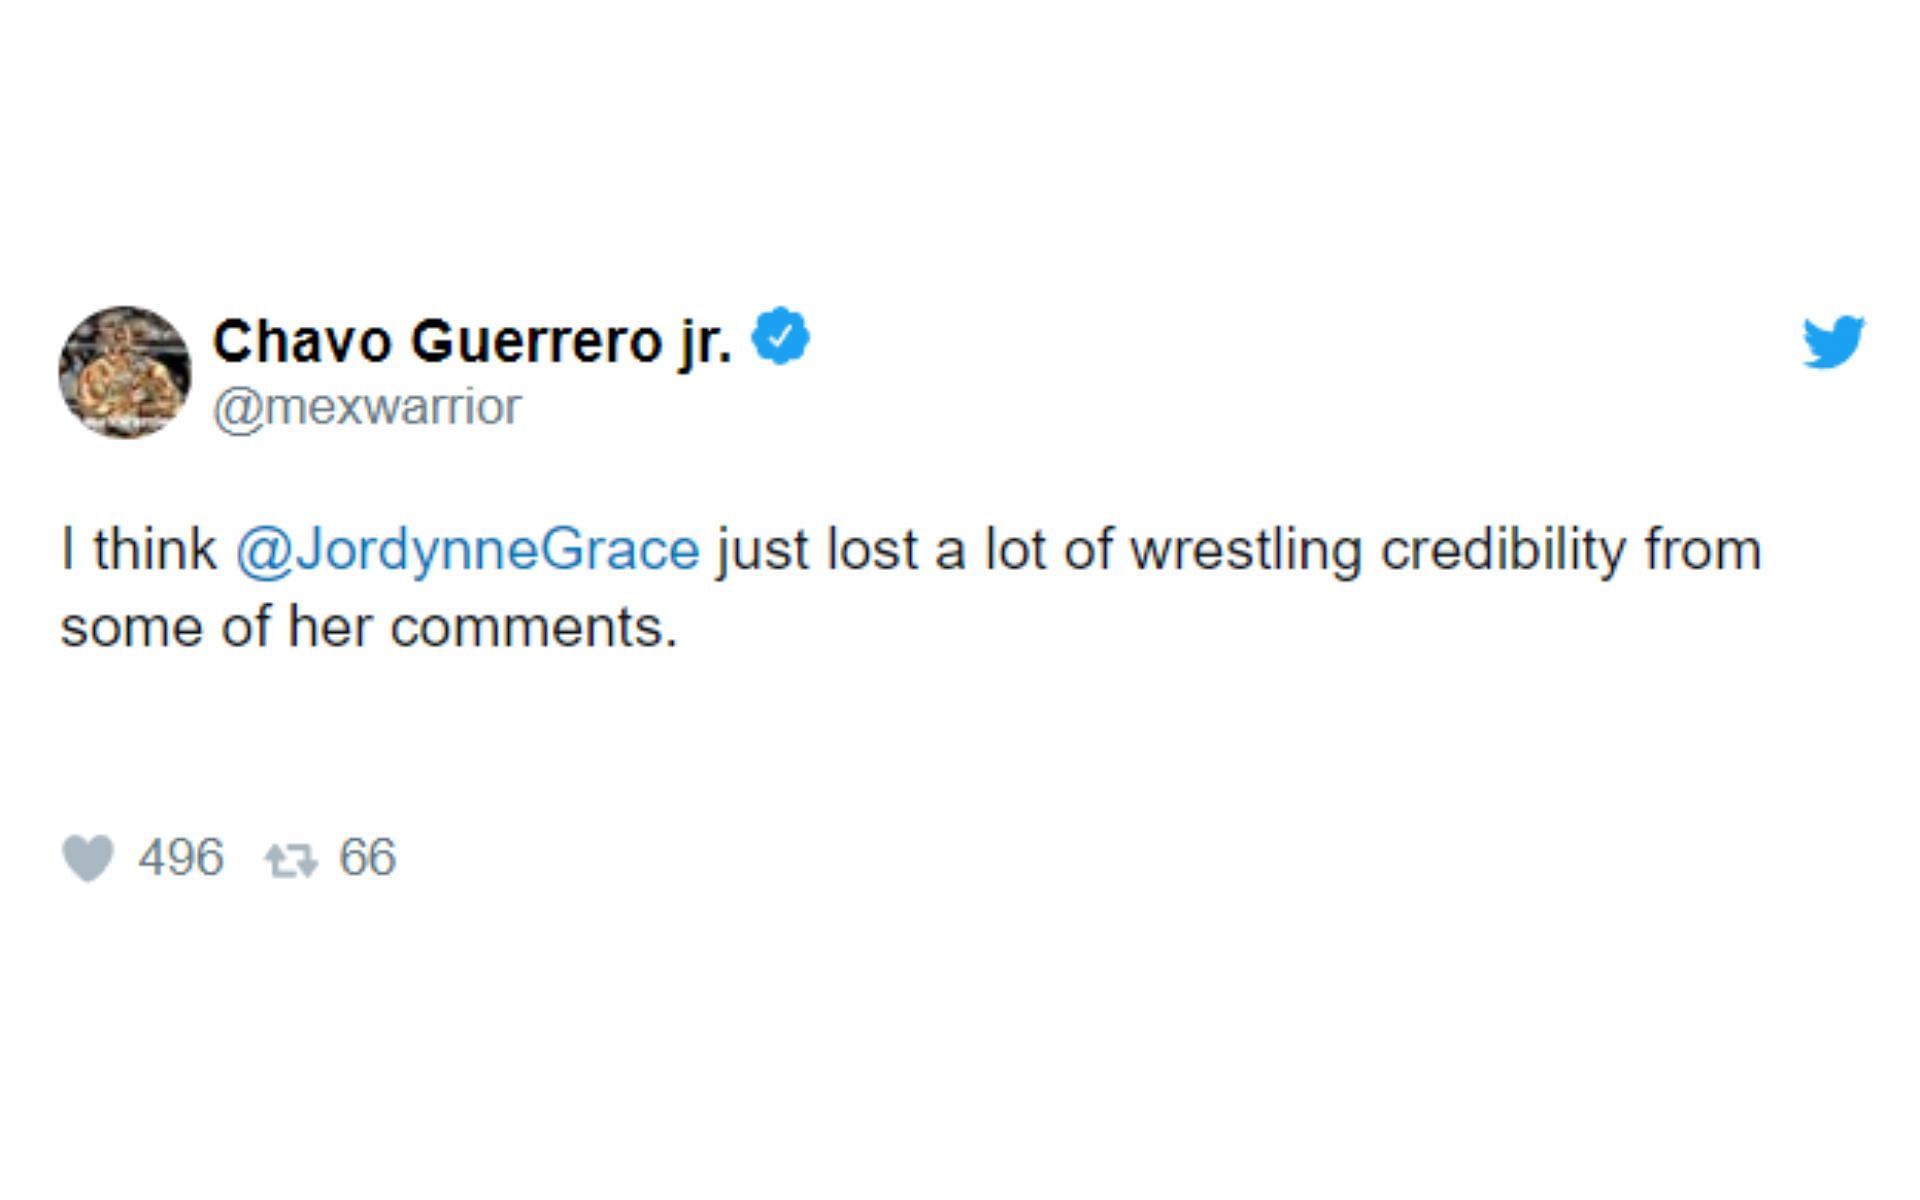 Chavo Guerrero had deleted the tweet responing to Jordynne Grace&#039;s comments